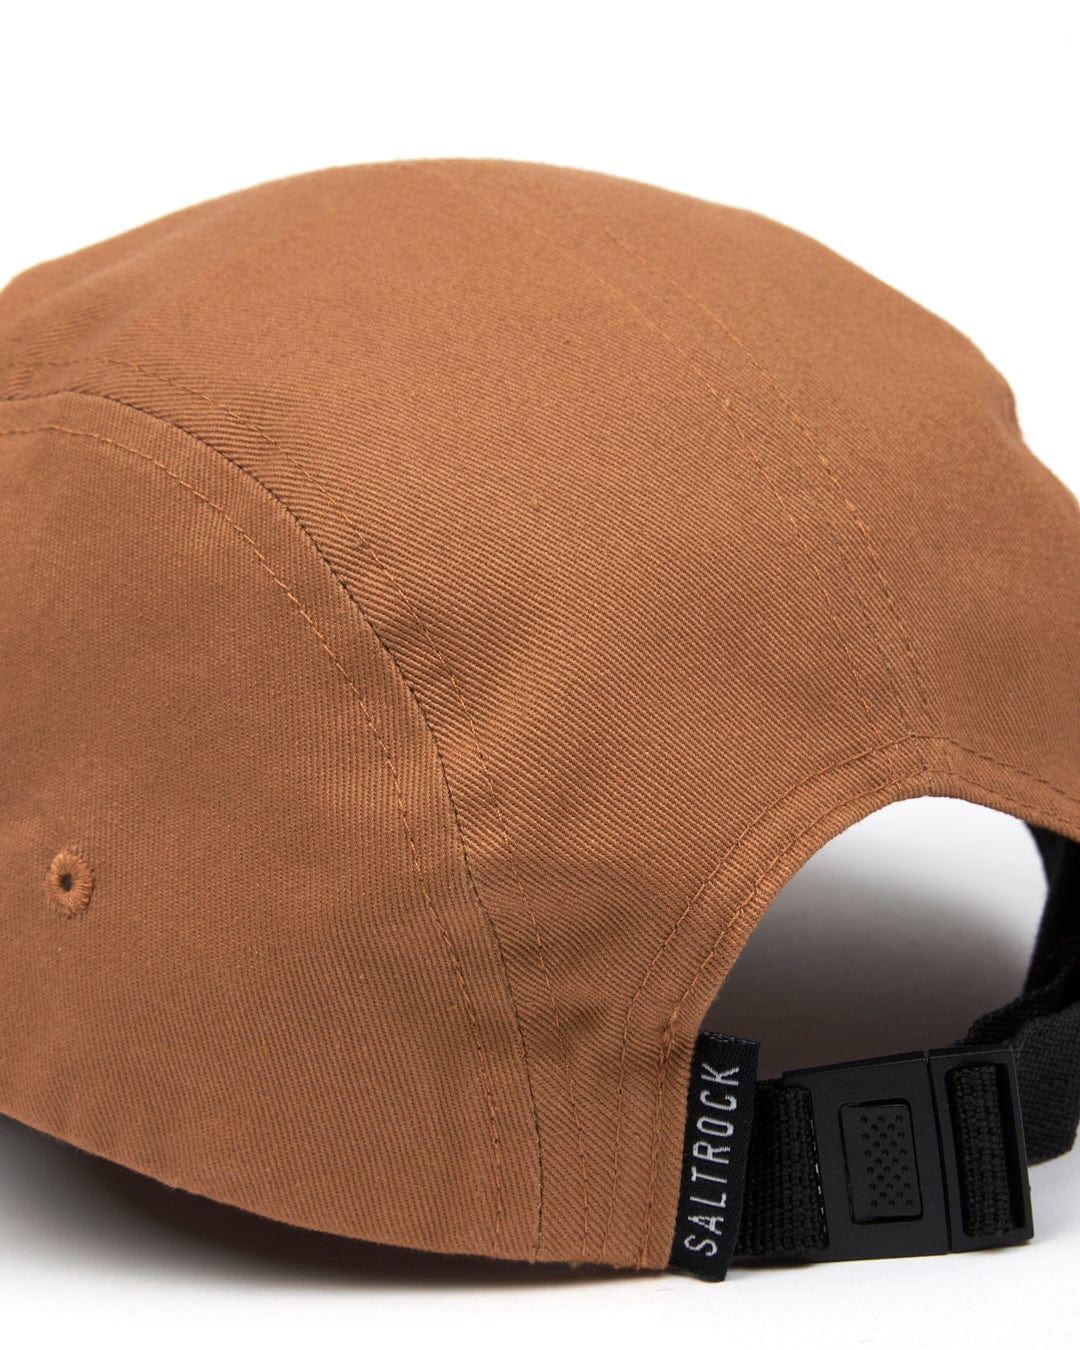 Saltrock Boardwalk - 5 Panel Cap - Brown with adjustable strap on a white background.